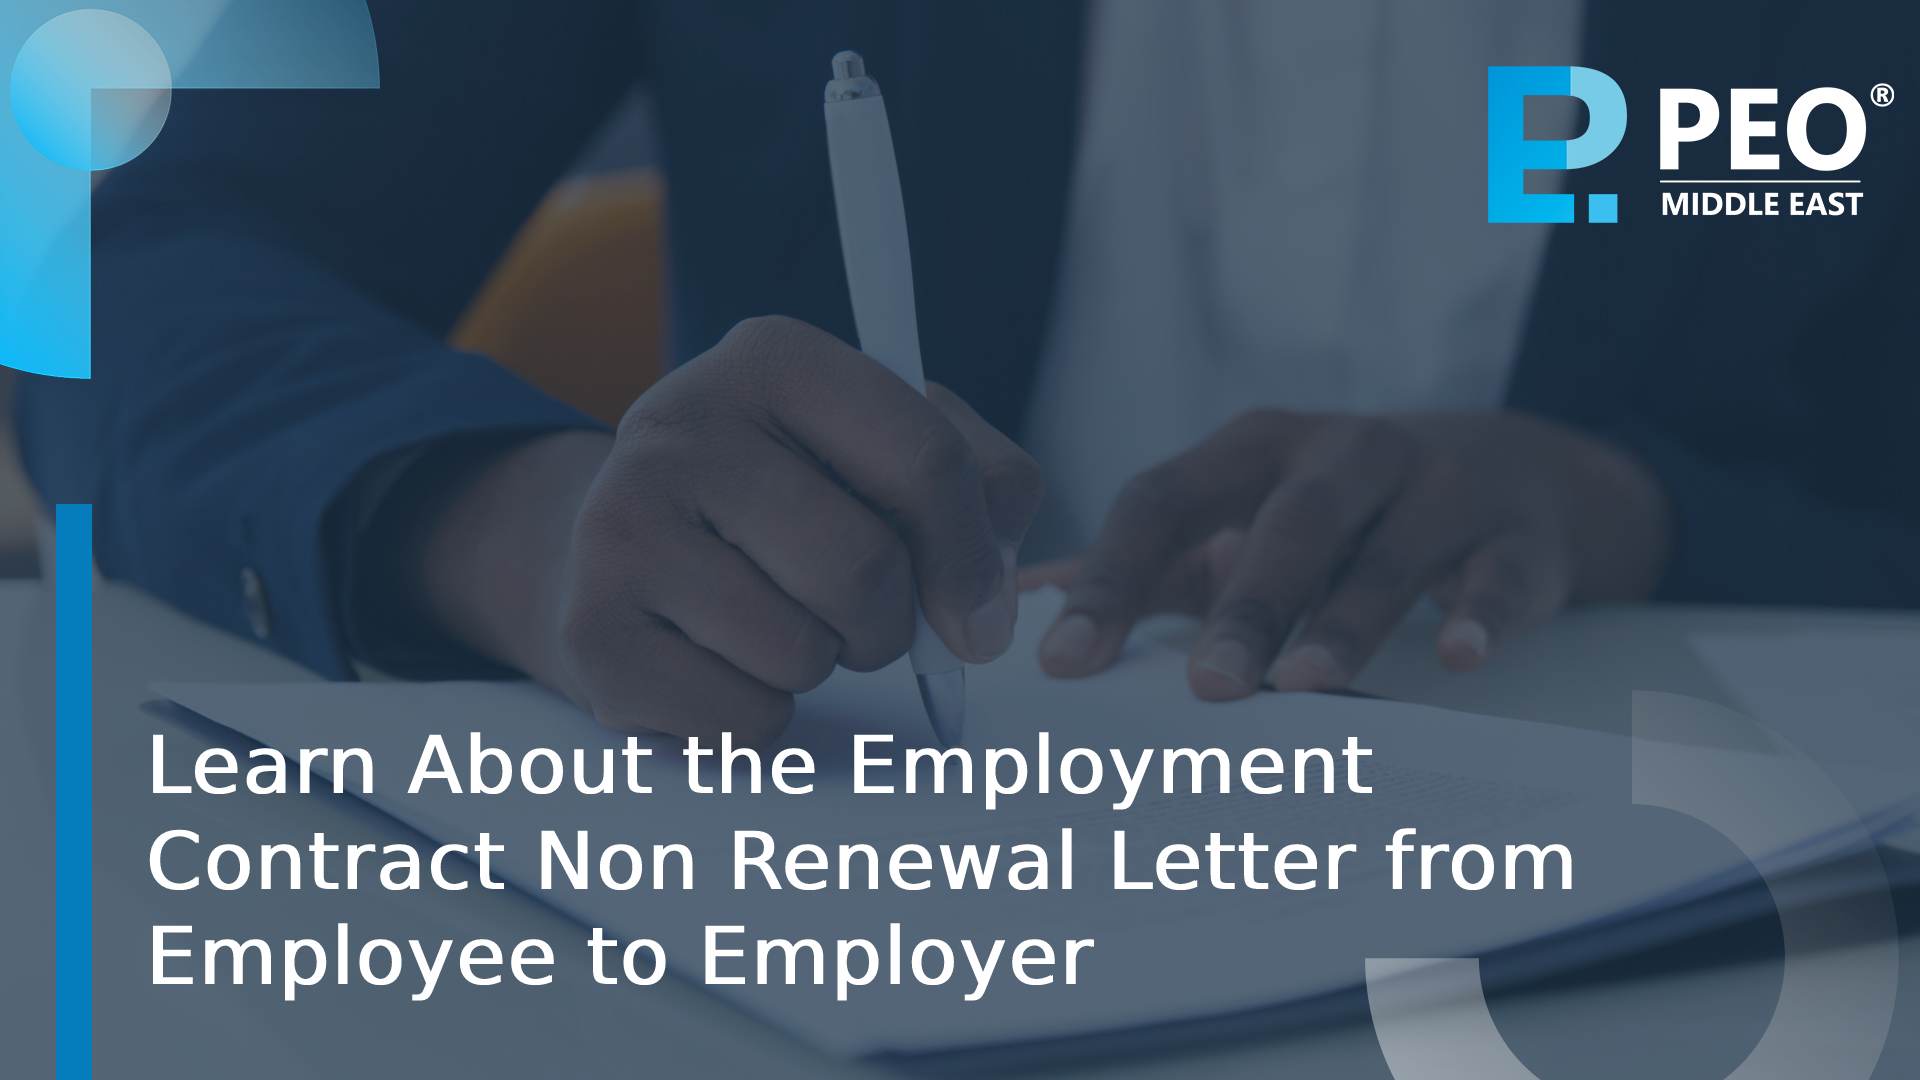 Learn About the Employment Contract Non Renewal Letter from Employee to Employer